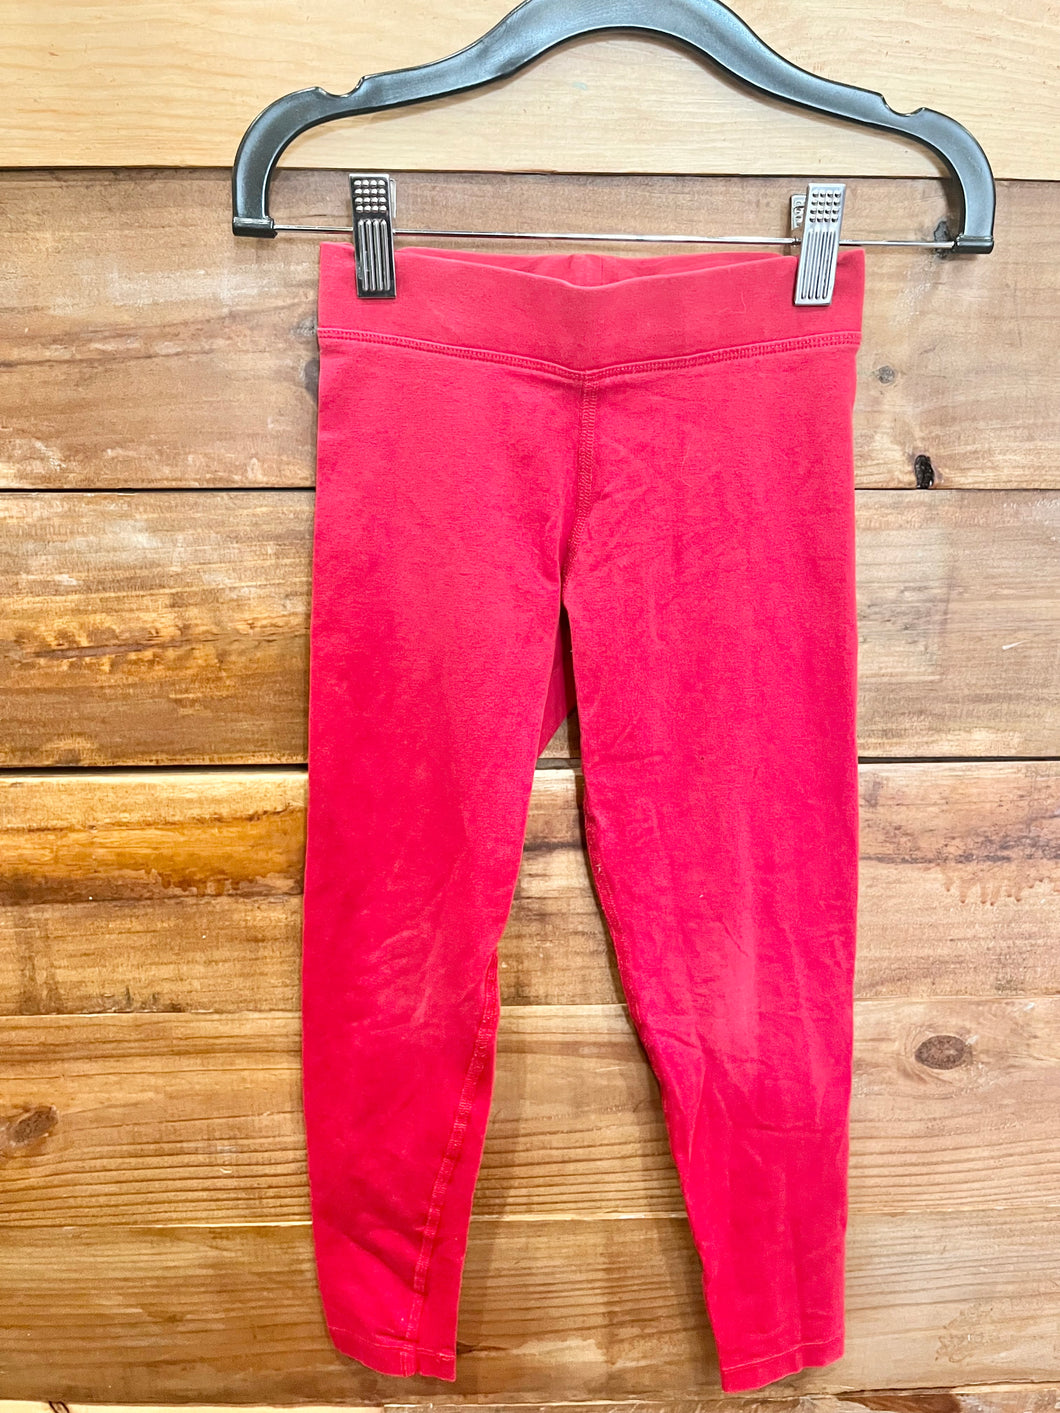 Primary Red Leggings Size 7*